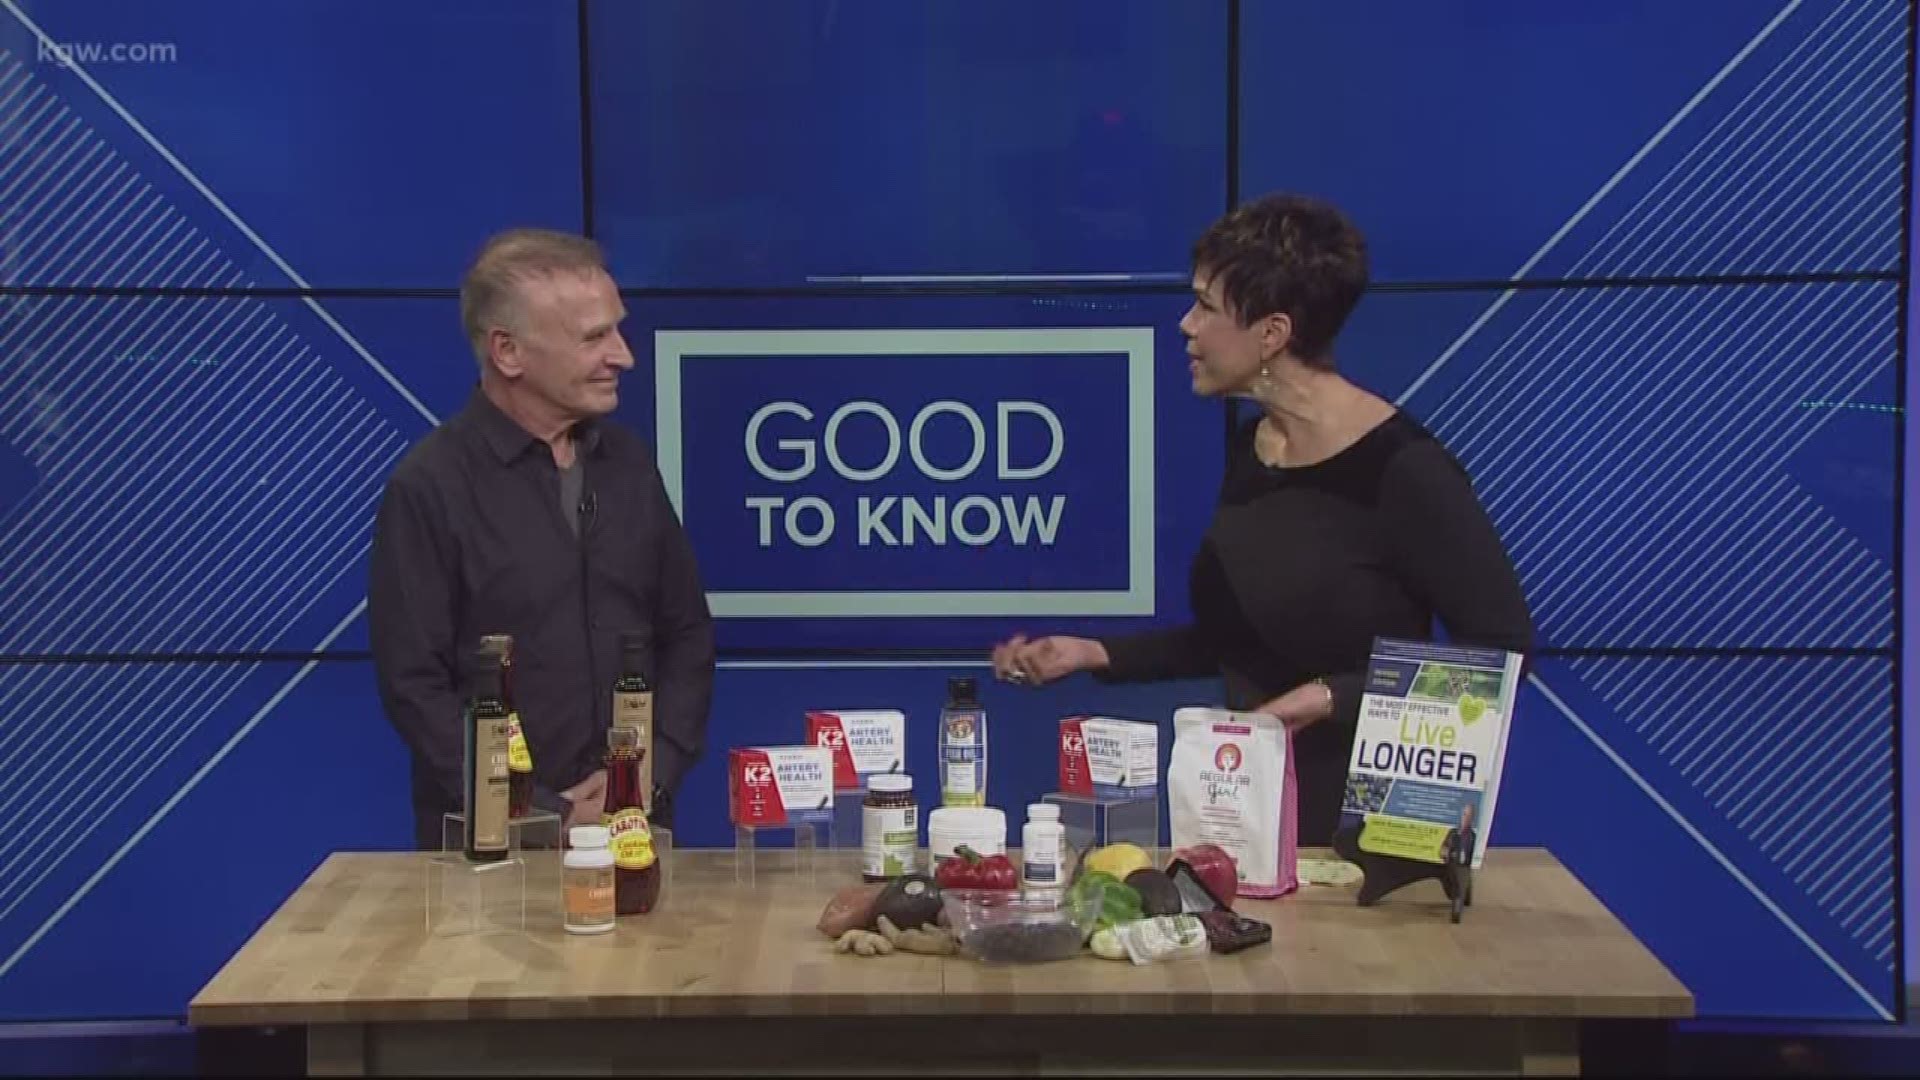 Jonny Bowden had some surprise tips. Use a supplement you've never heard of called vitamin k2. He also says to eat fermented foods and animal organs.